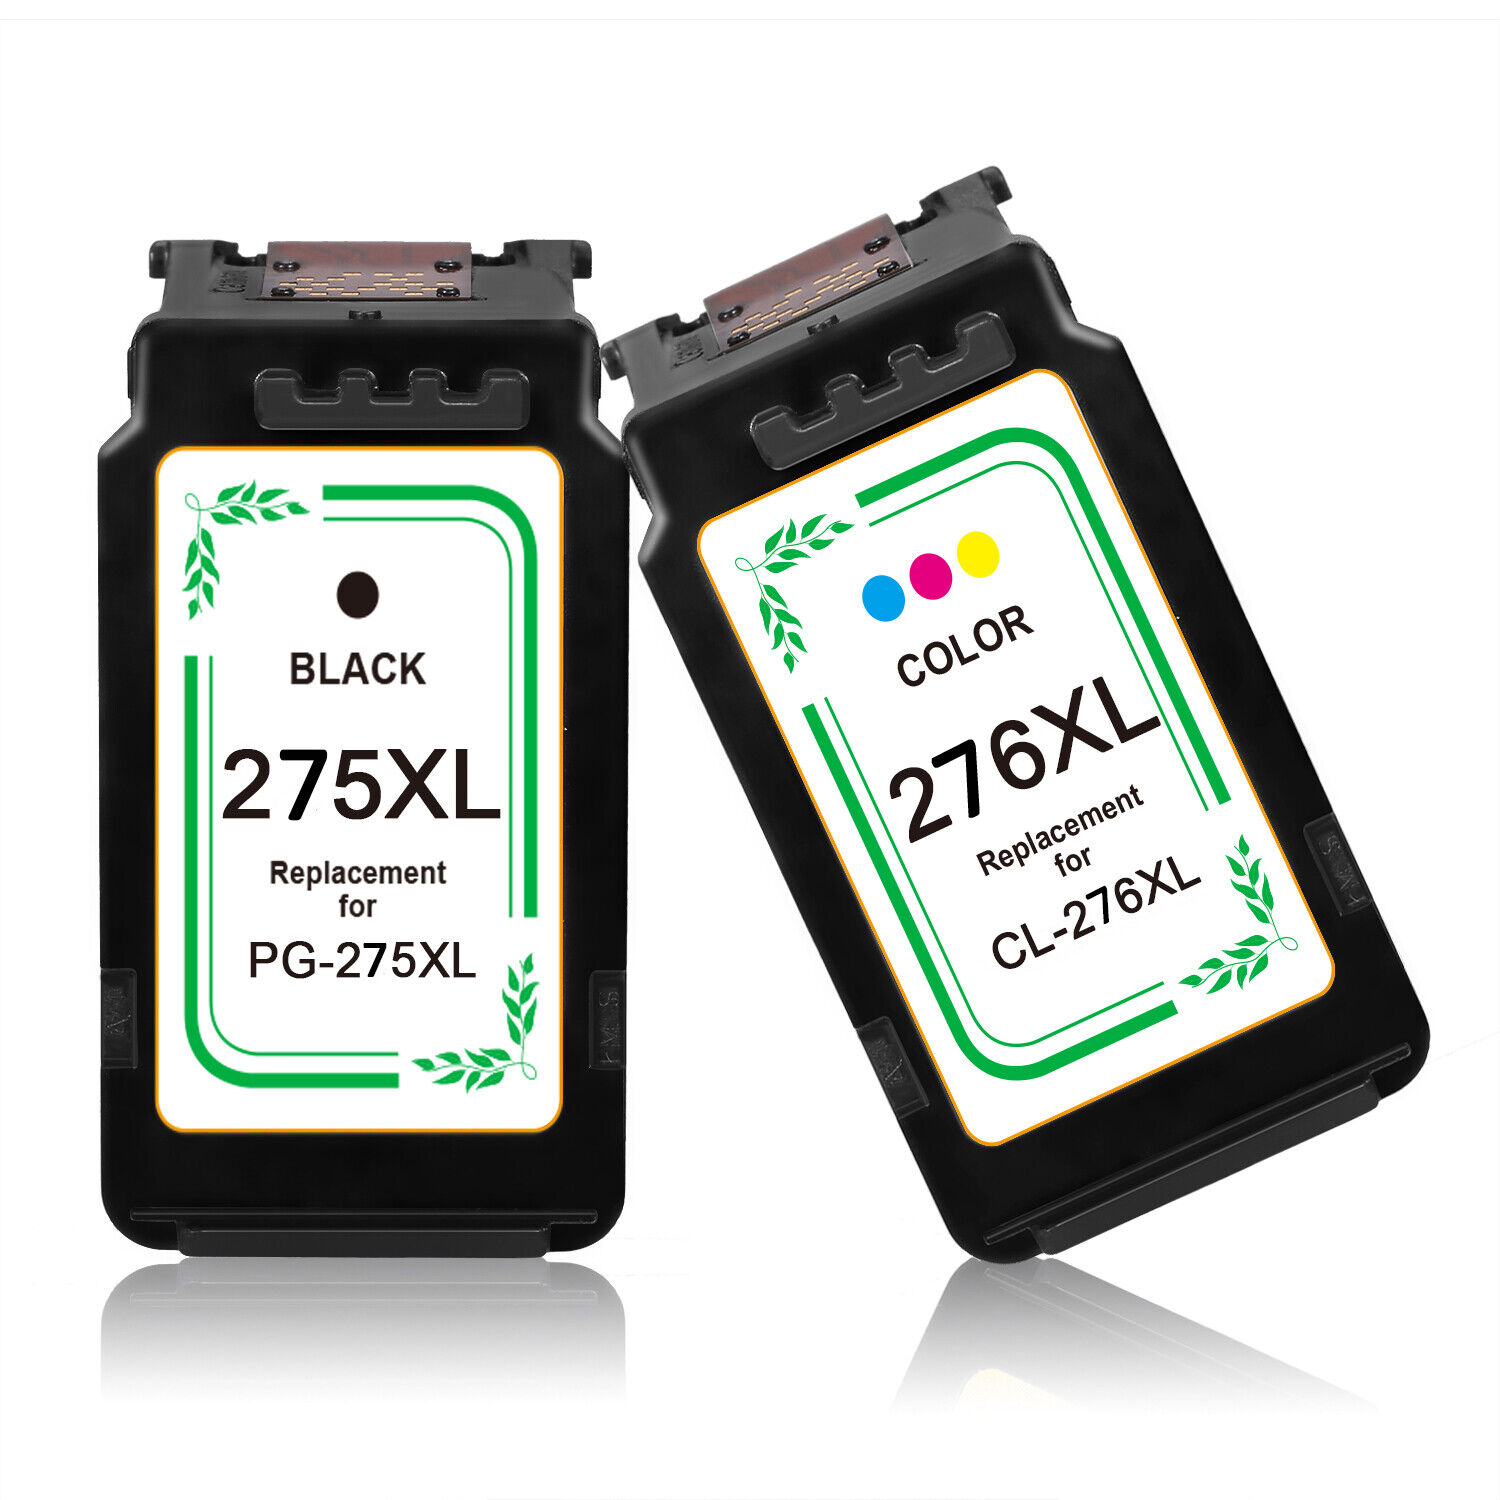 Ink Cartridge Black Color Combo For Canon PG-245XL 240XL 210XL 275XL